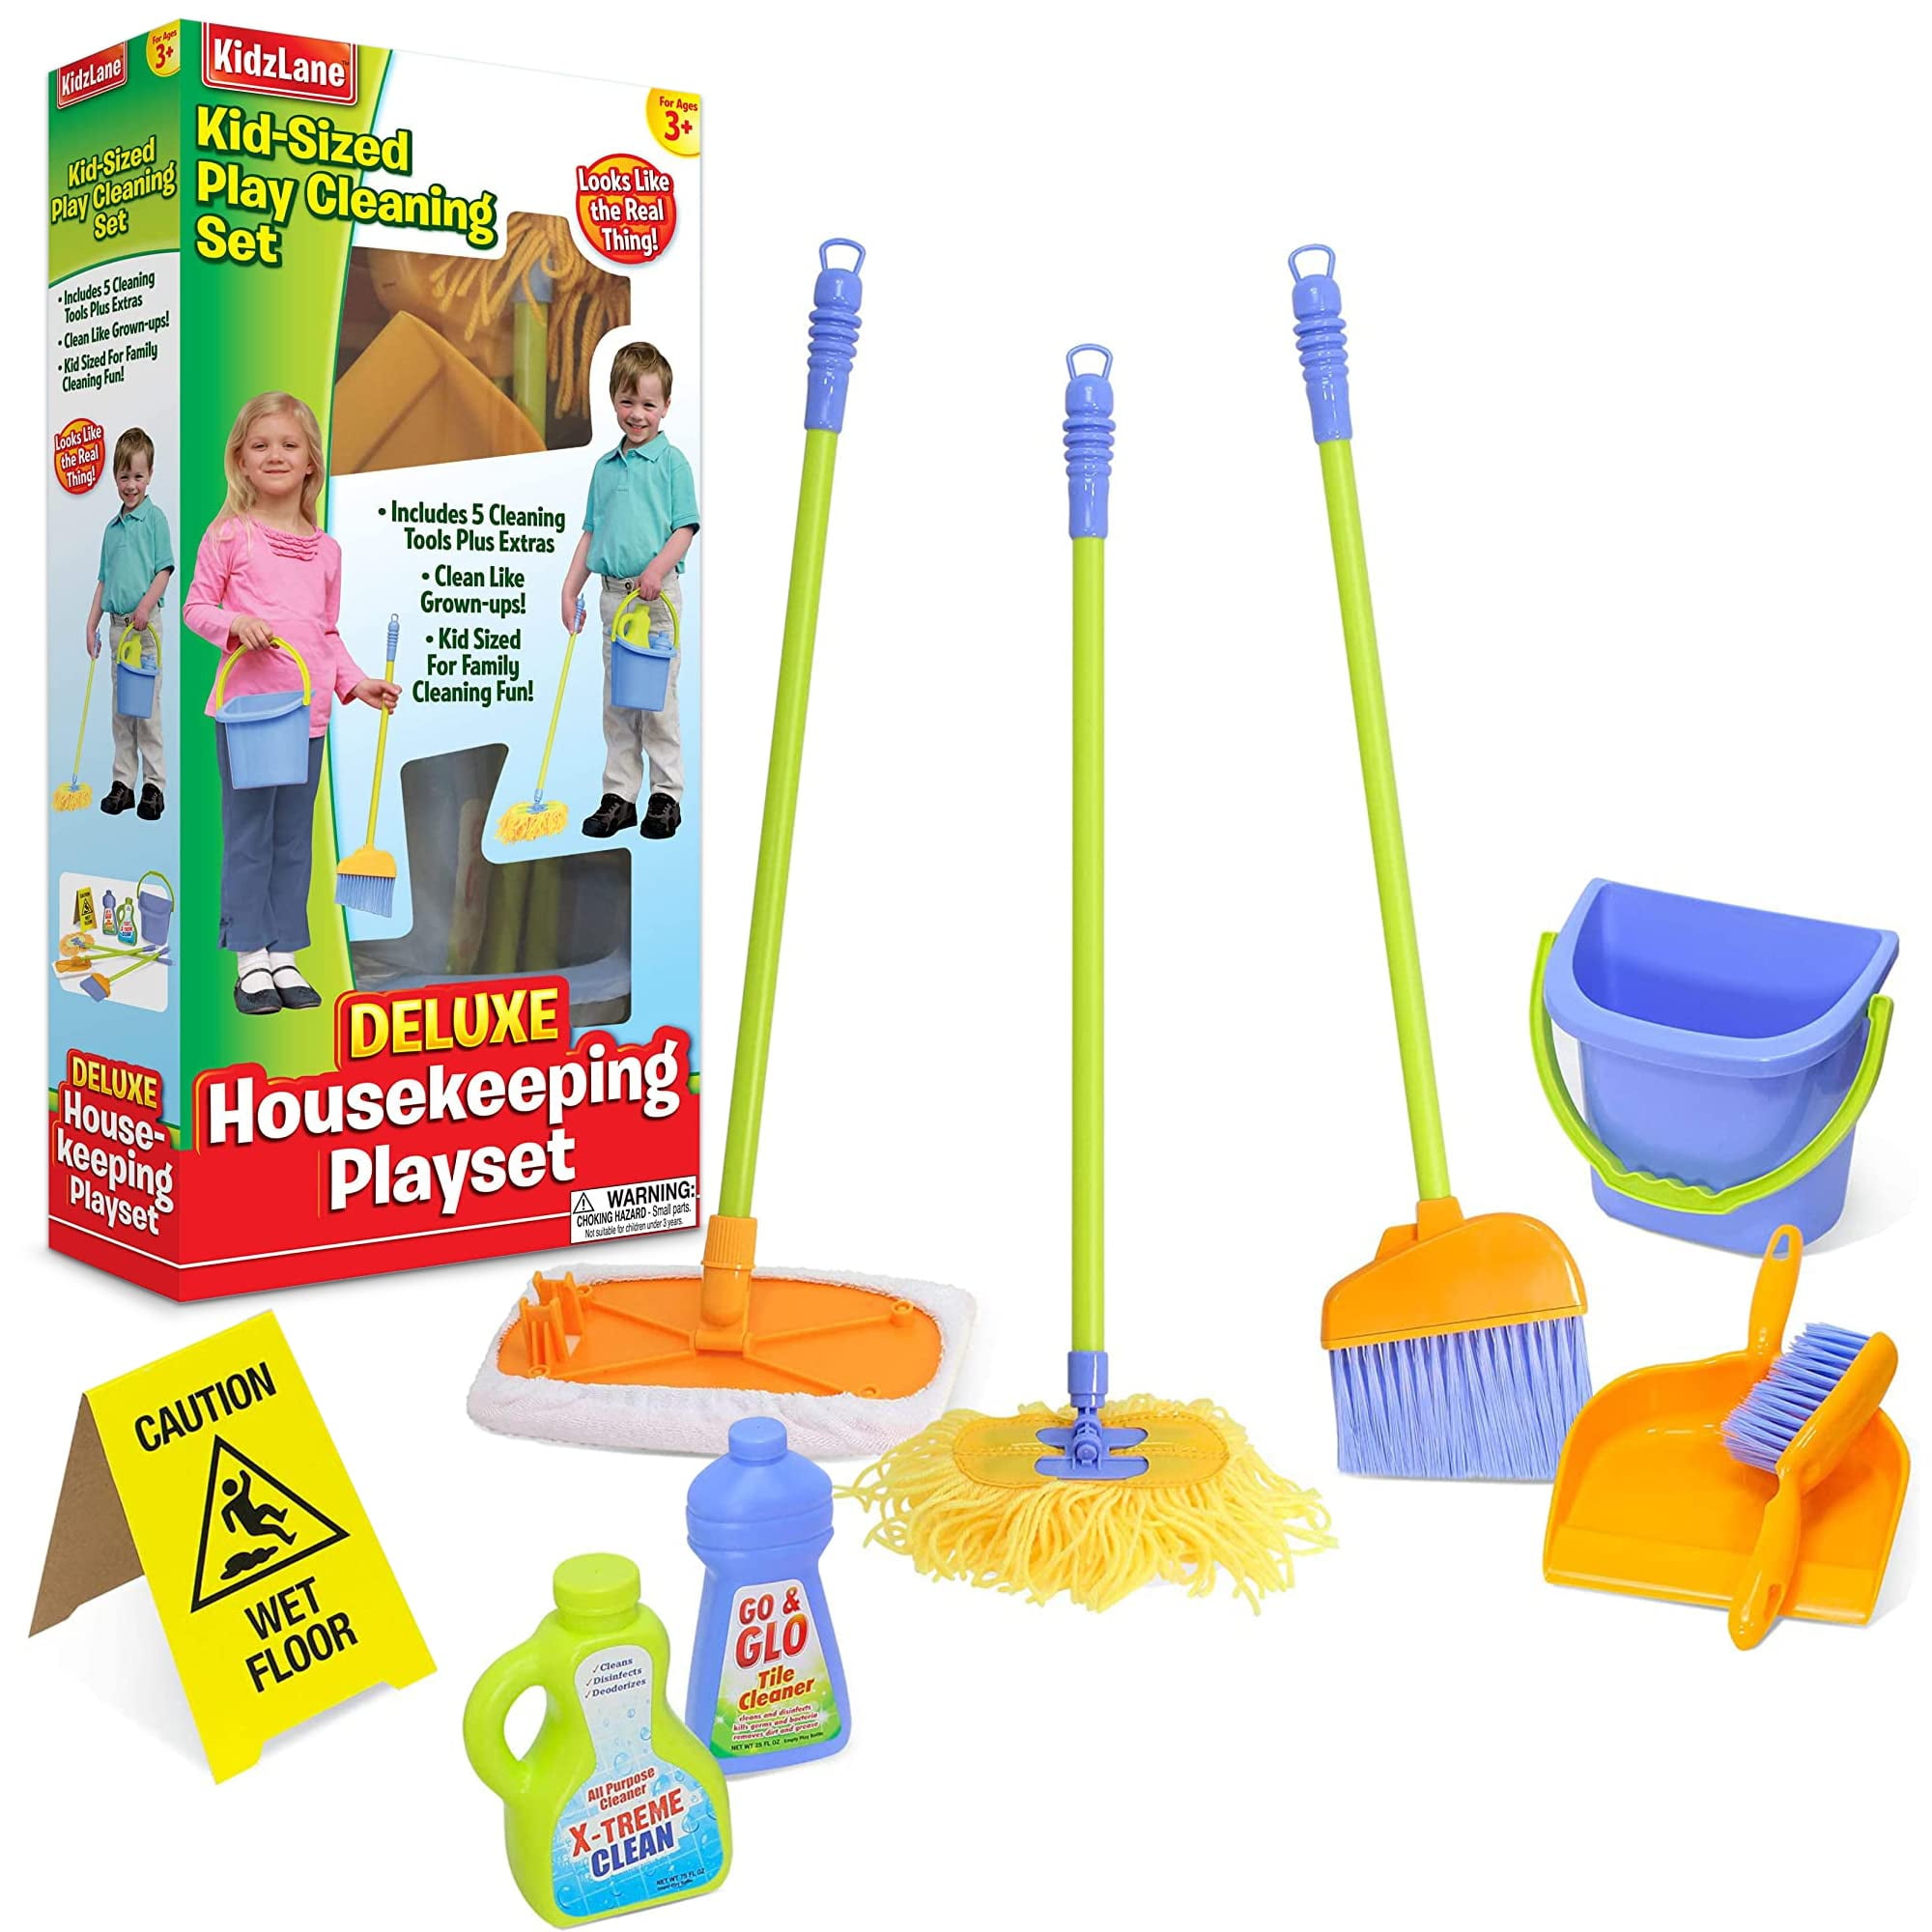 Kids' Pretend Play Cleaning Toy Set Including Vacuum Cleaner, Broom, Mop,  Cleaning Cart, Car Washing Tools For Cleaning And Doing Housework Games